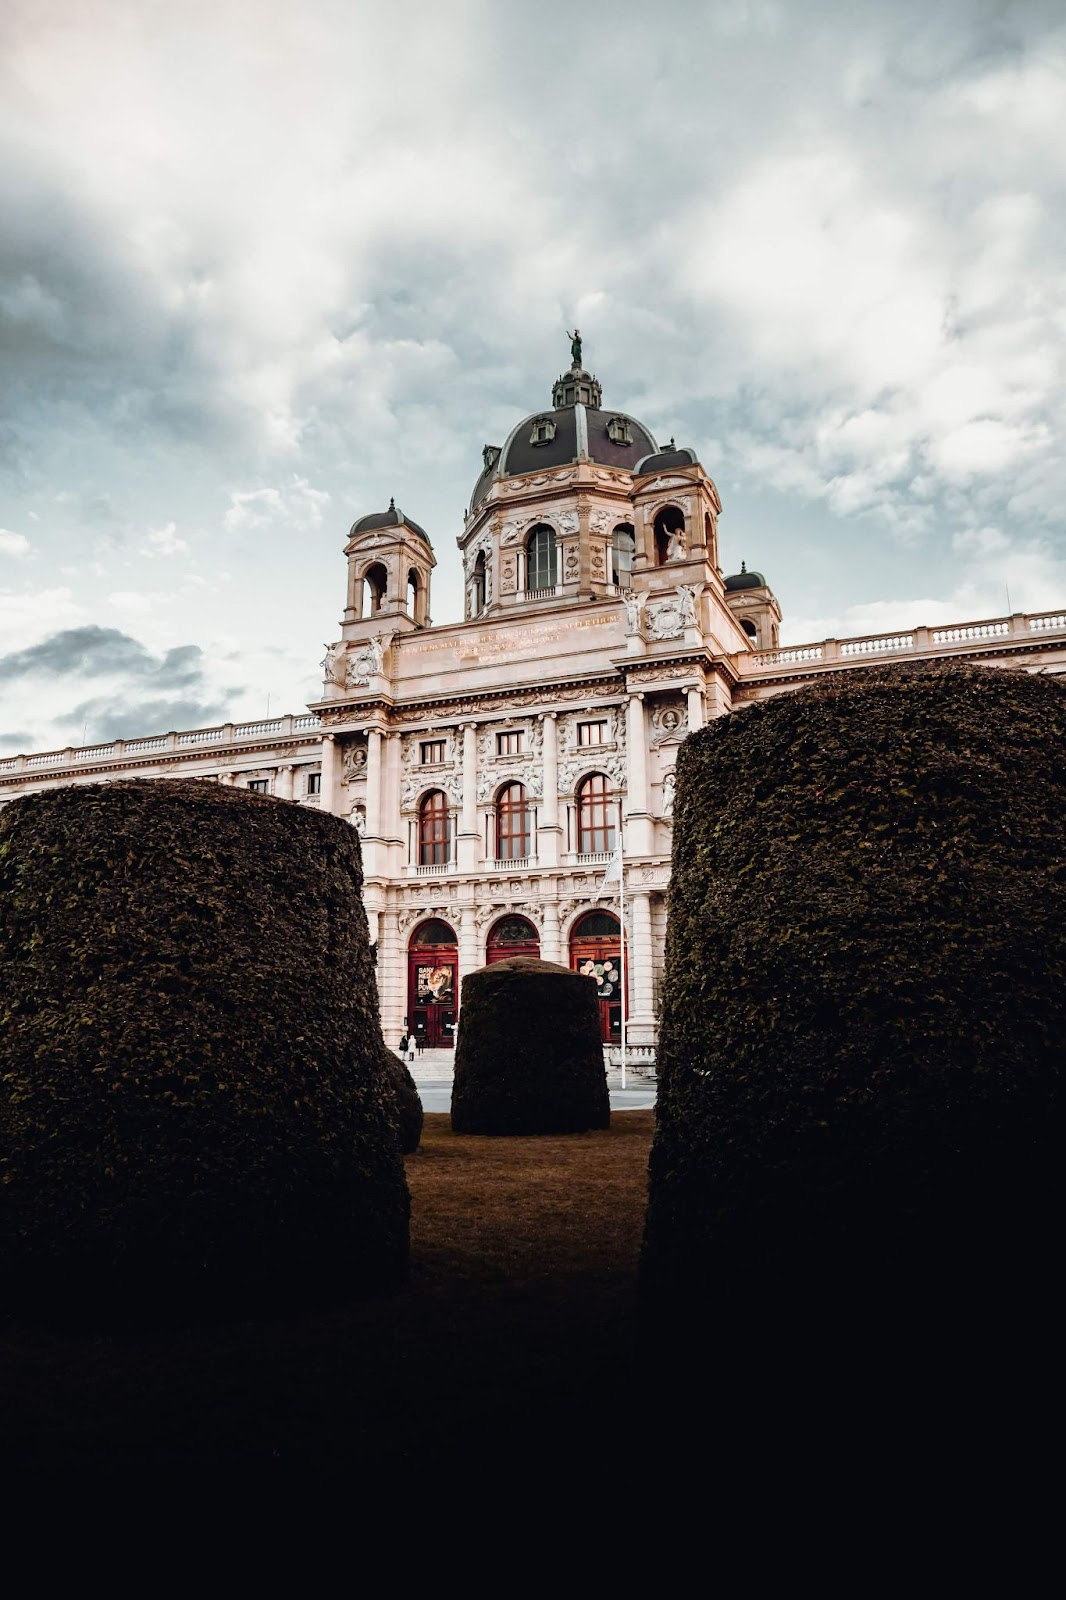 1 day in Vienna, Kunsthistorisches Museum or the Museum of Fine Arts